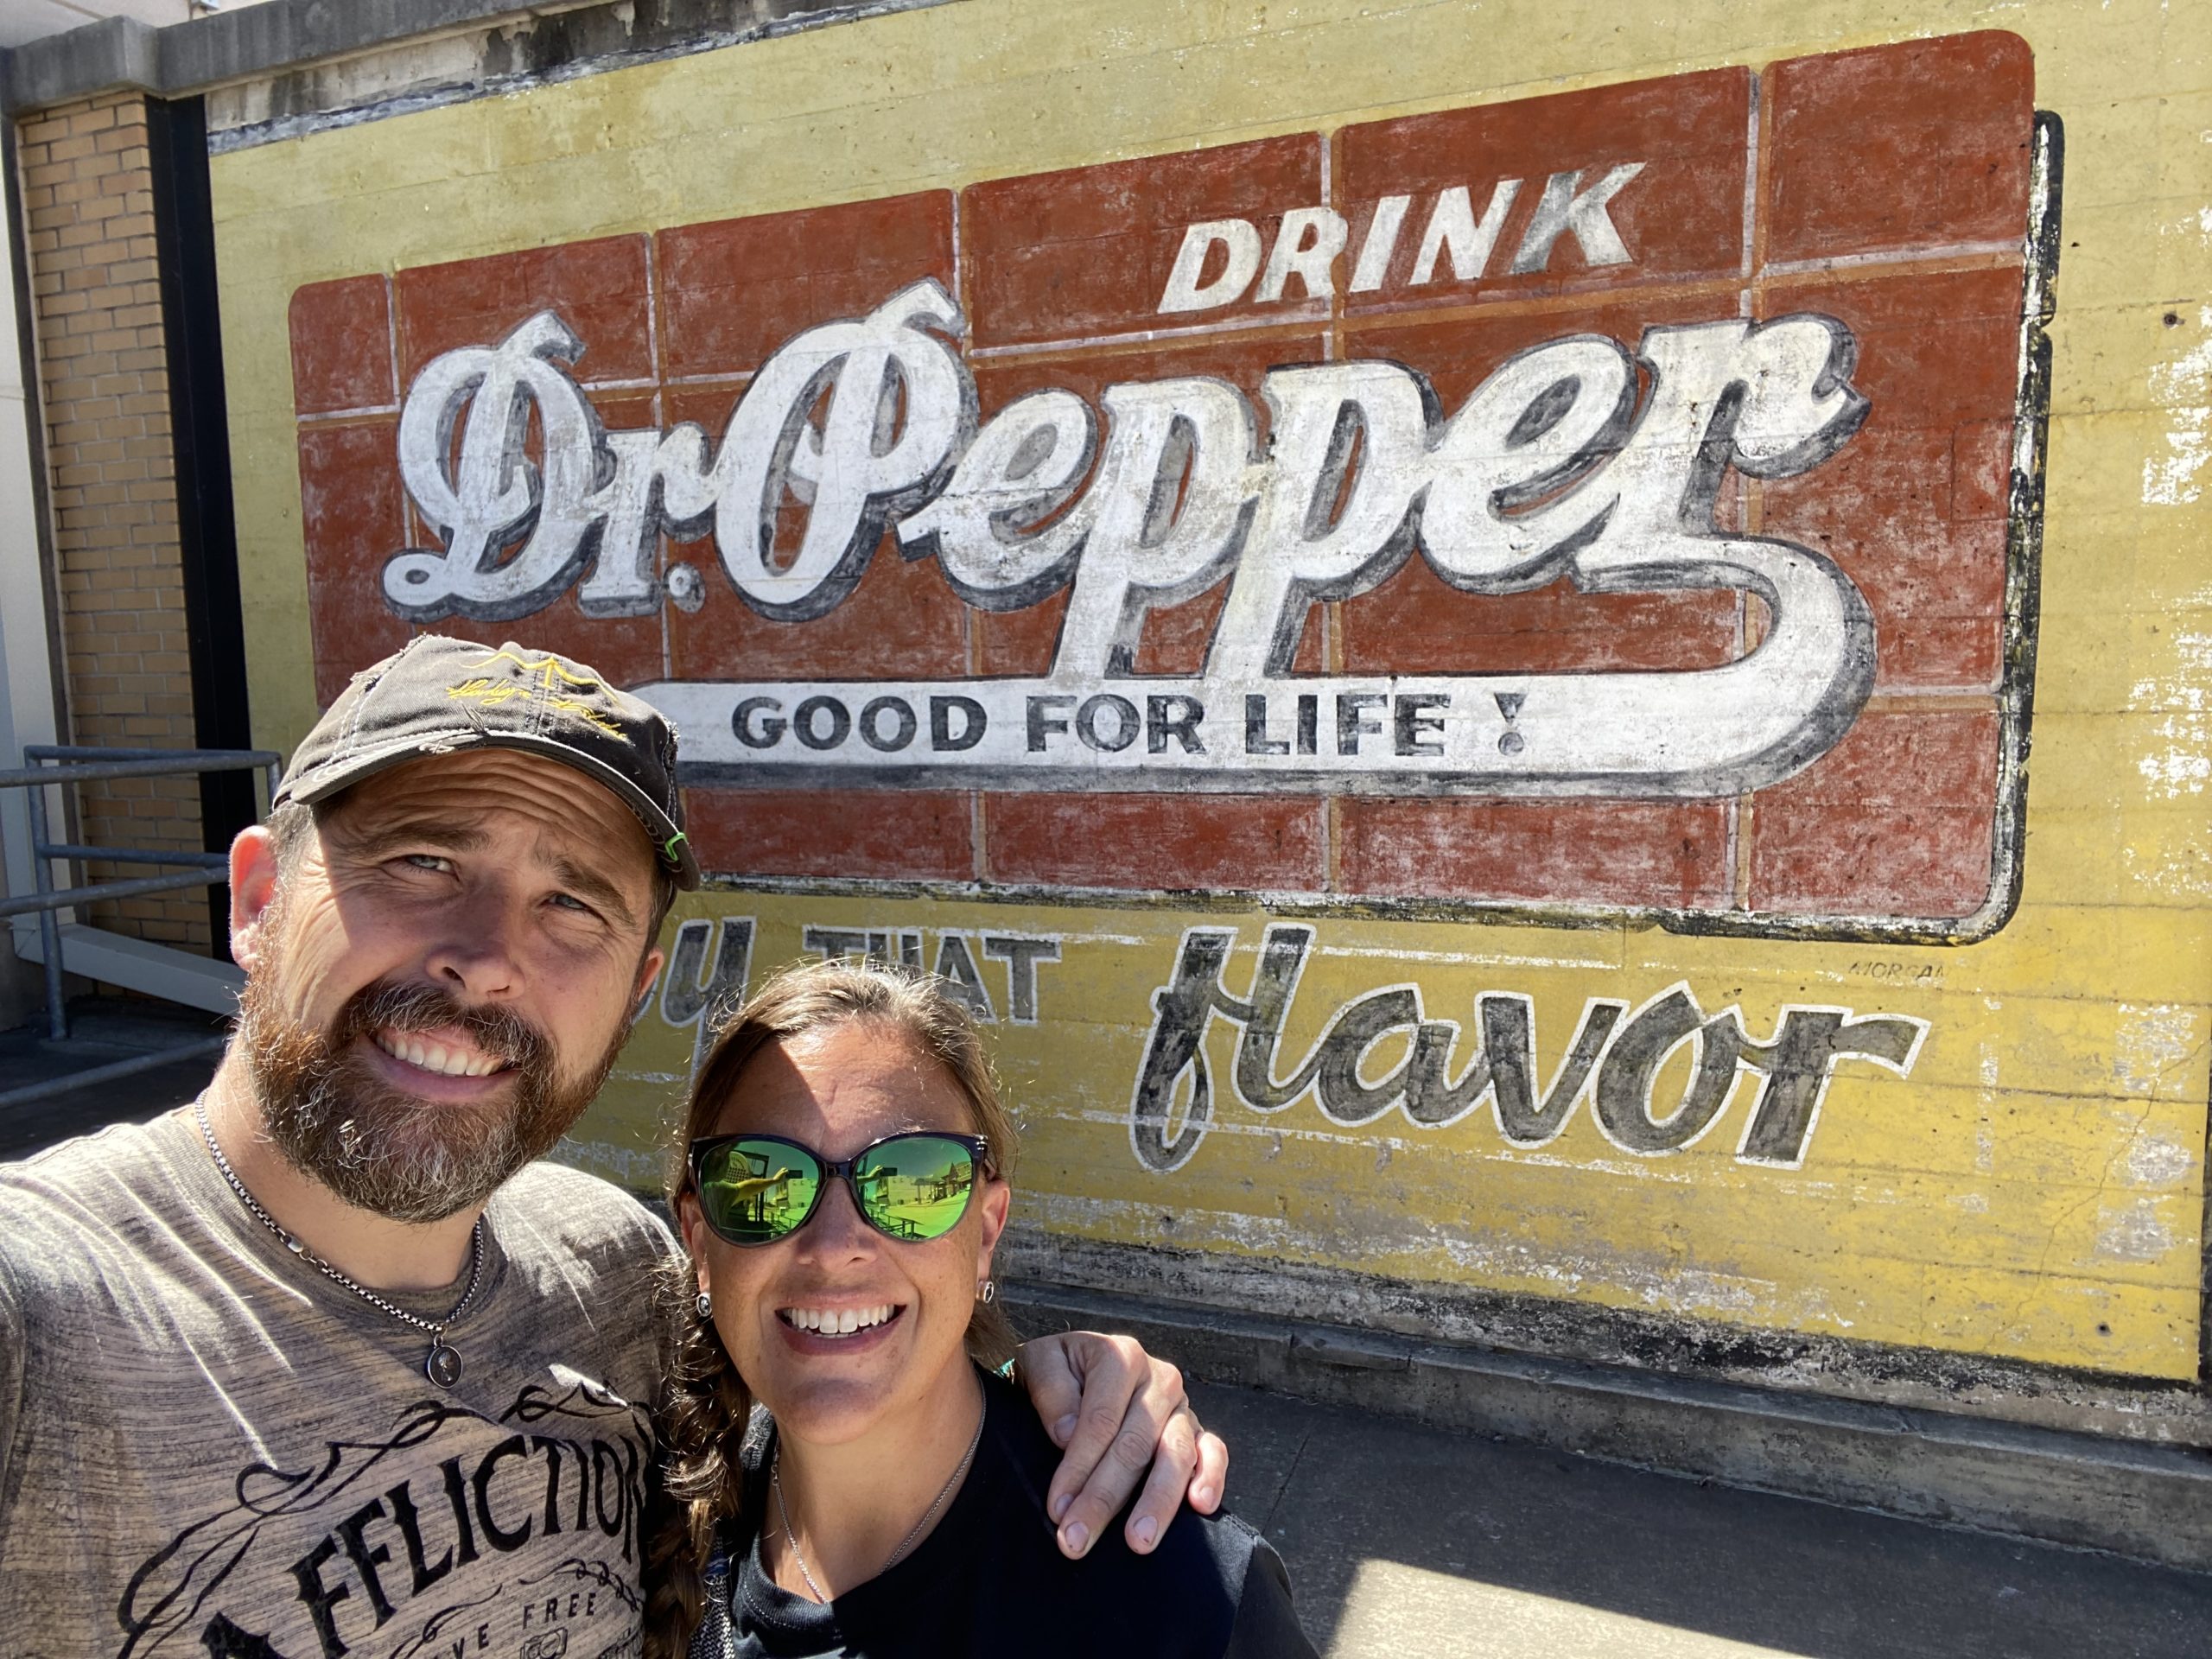 Me and Tim at the Dr. Pepper Museum in Waco